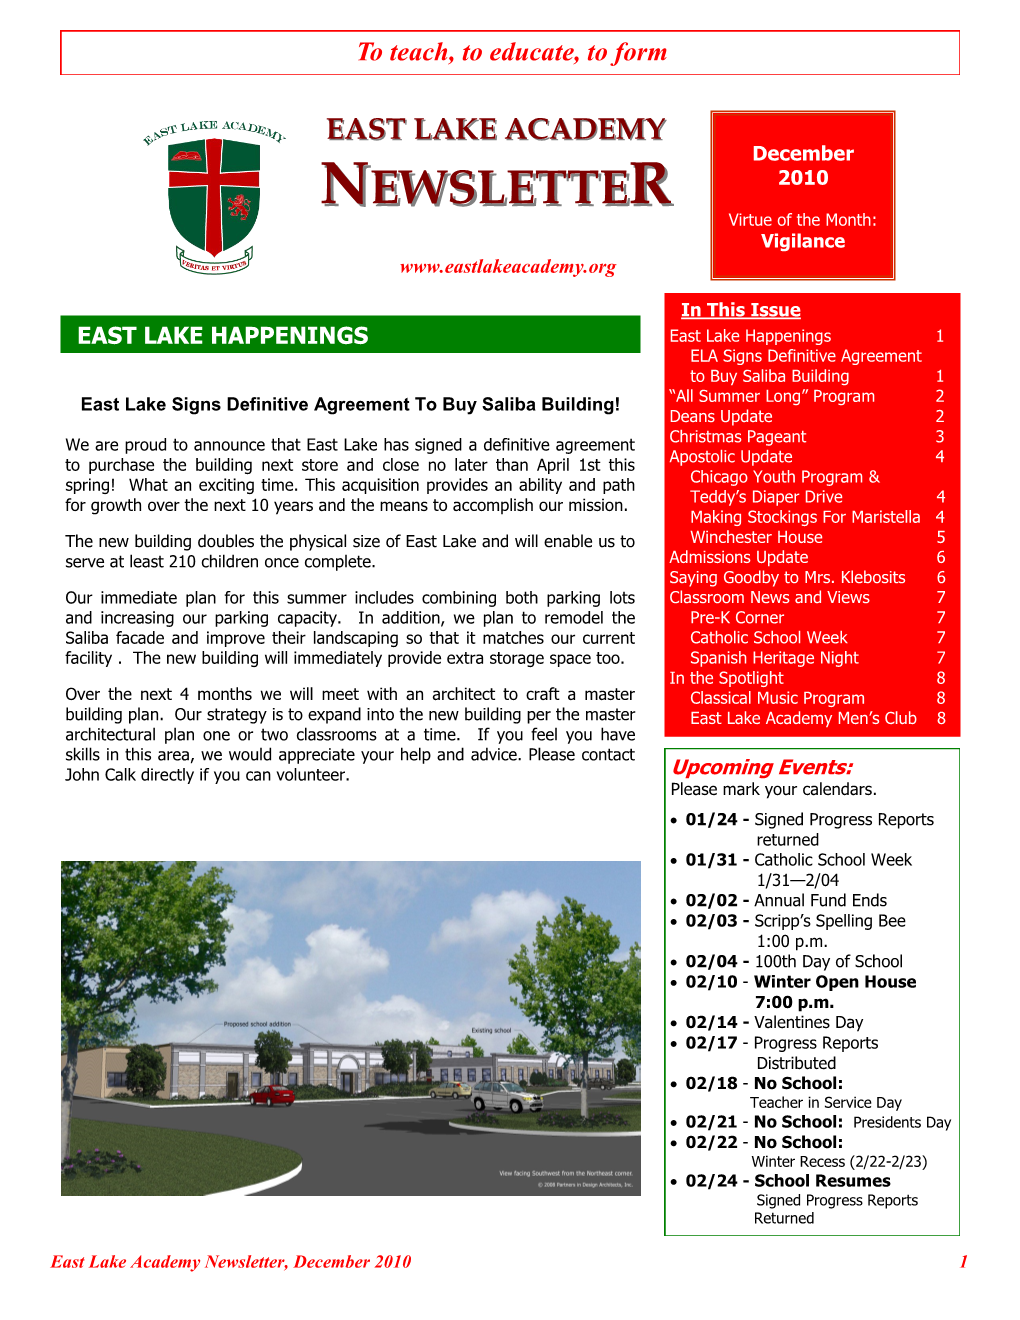 Newsletter, December 2010 1 to Teach, to Educate, to Form